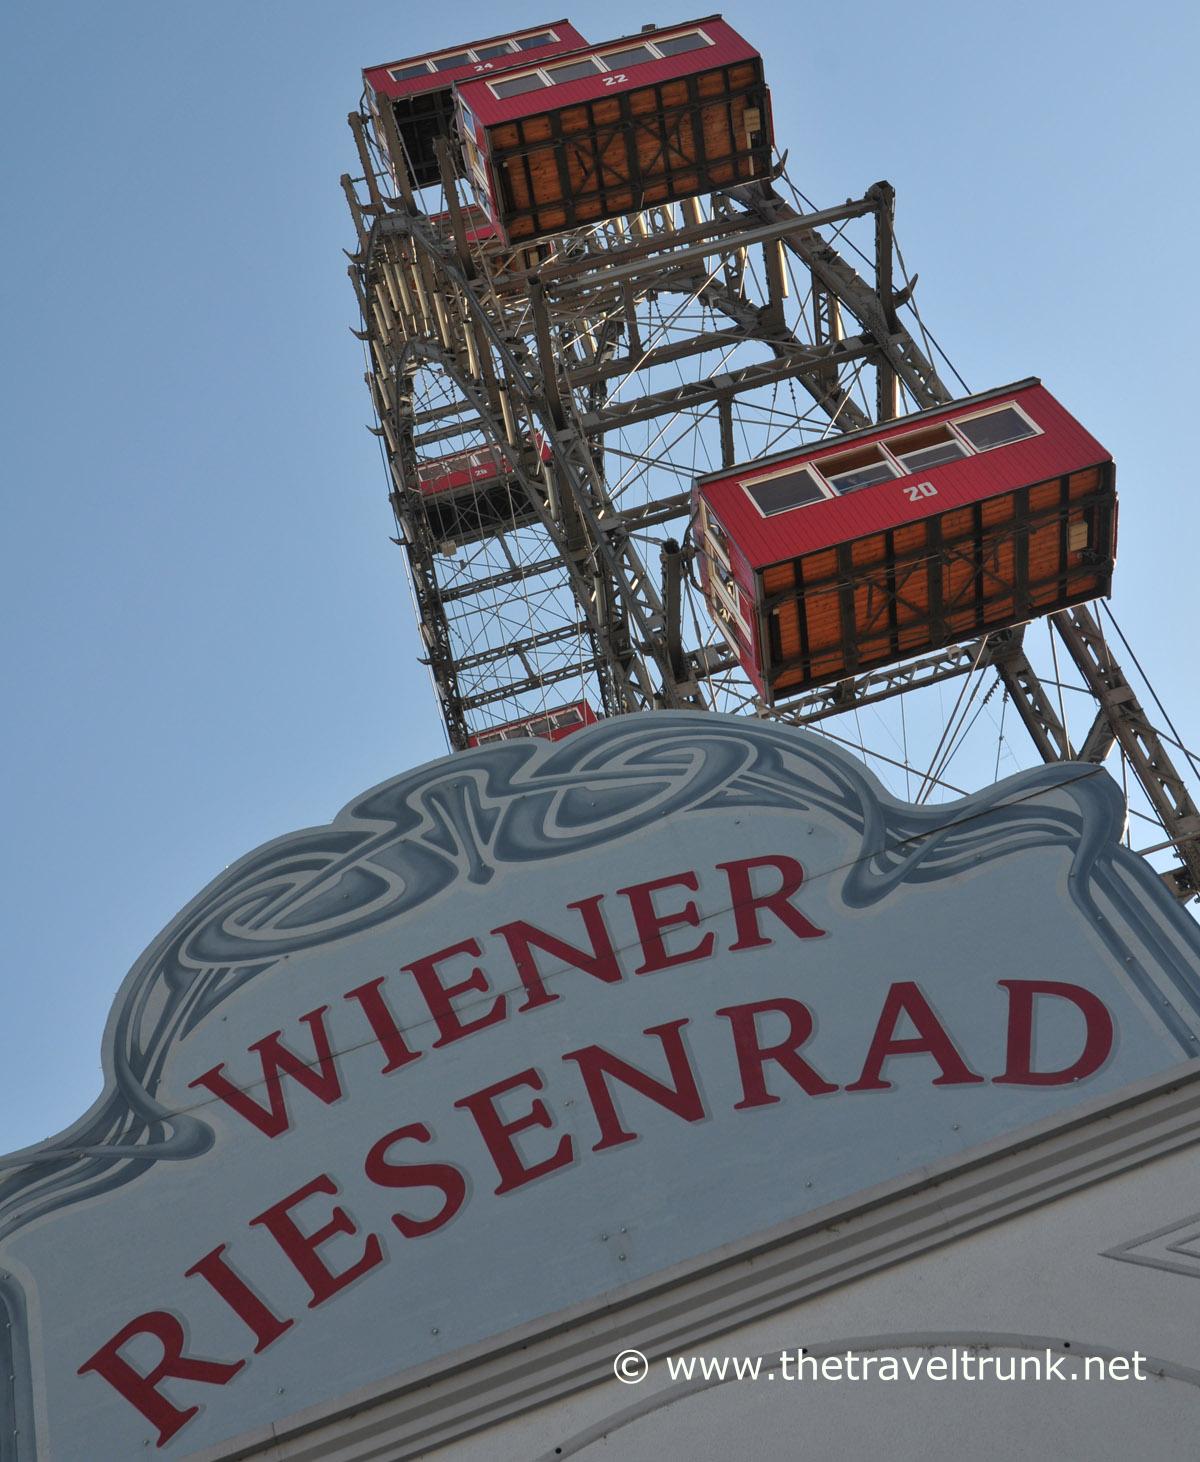 The older wooden cabins. The Riesenrad giant Ferris wheel in Vienna as it was before the cabins were changed.Picture by: © Geoff Moore/www.thetraveltrunk.net